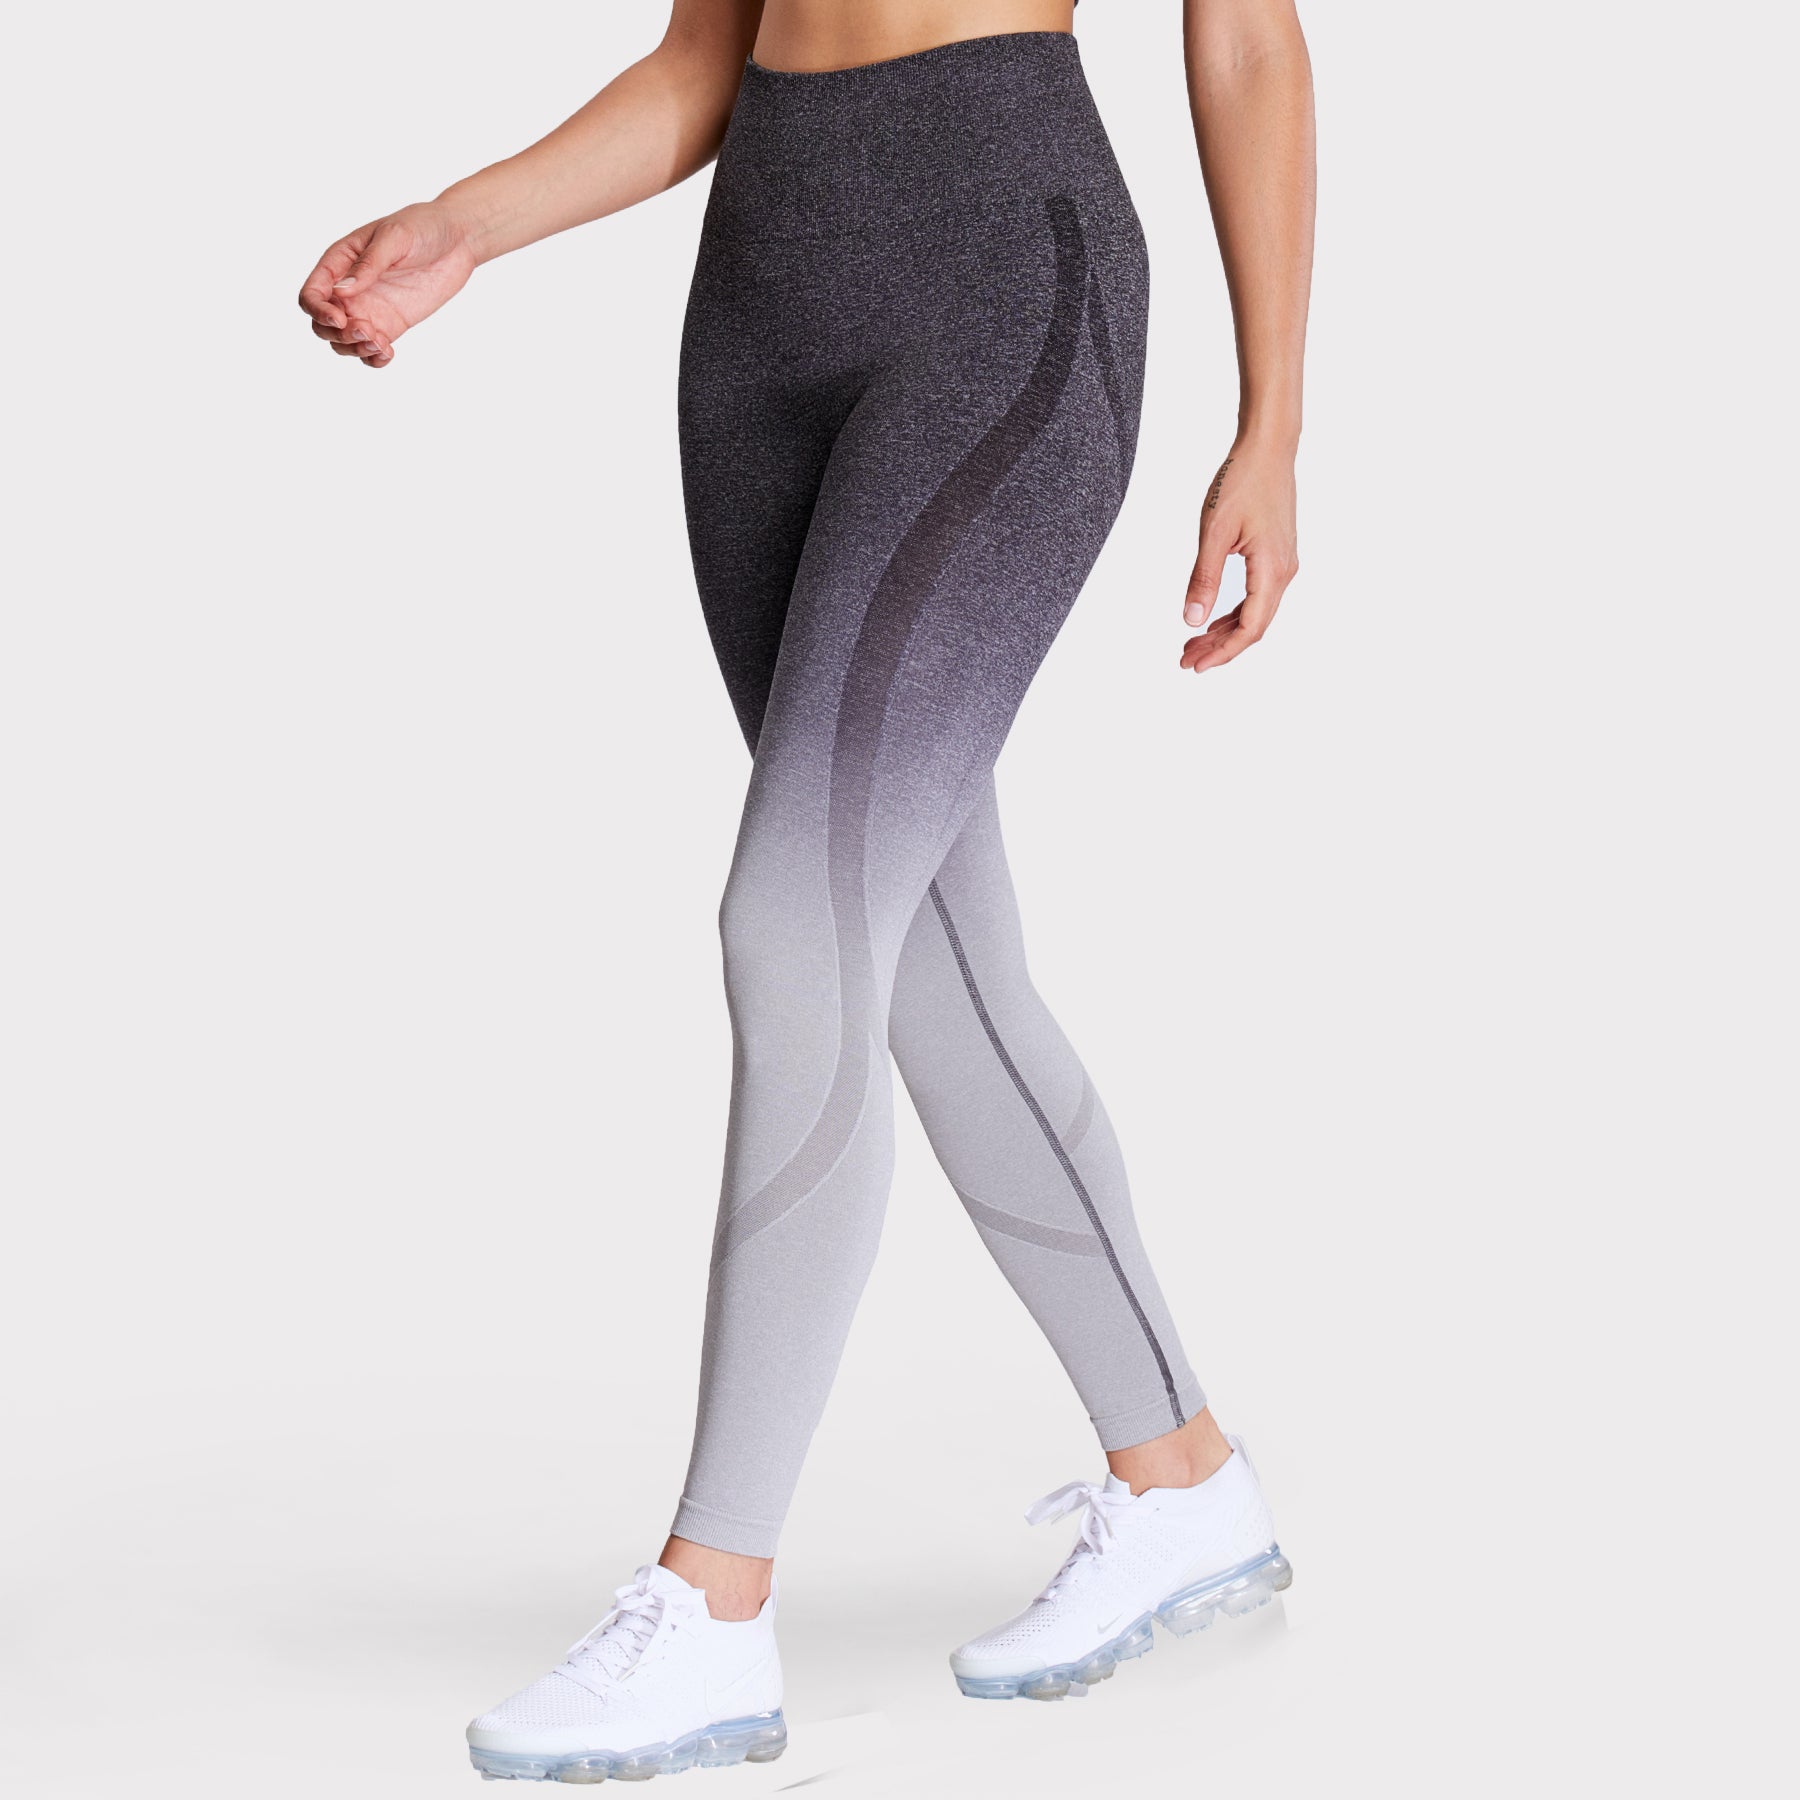  Aoxjox High Waisted Workout Leggings For Women